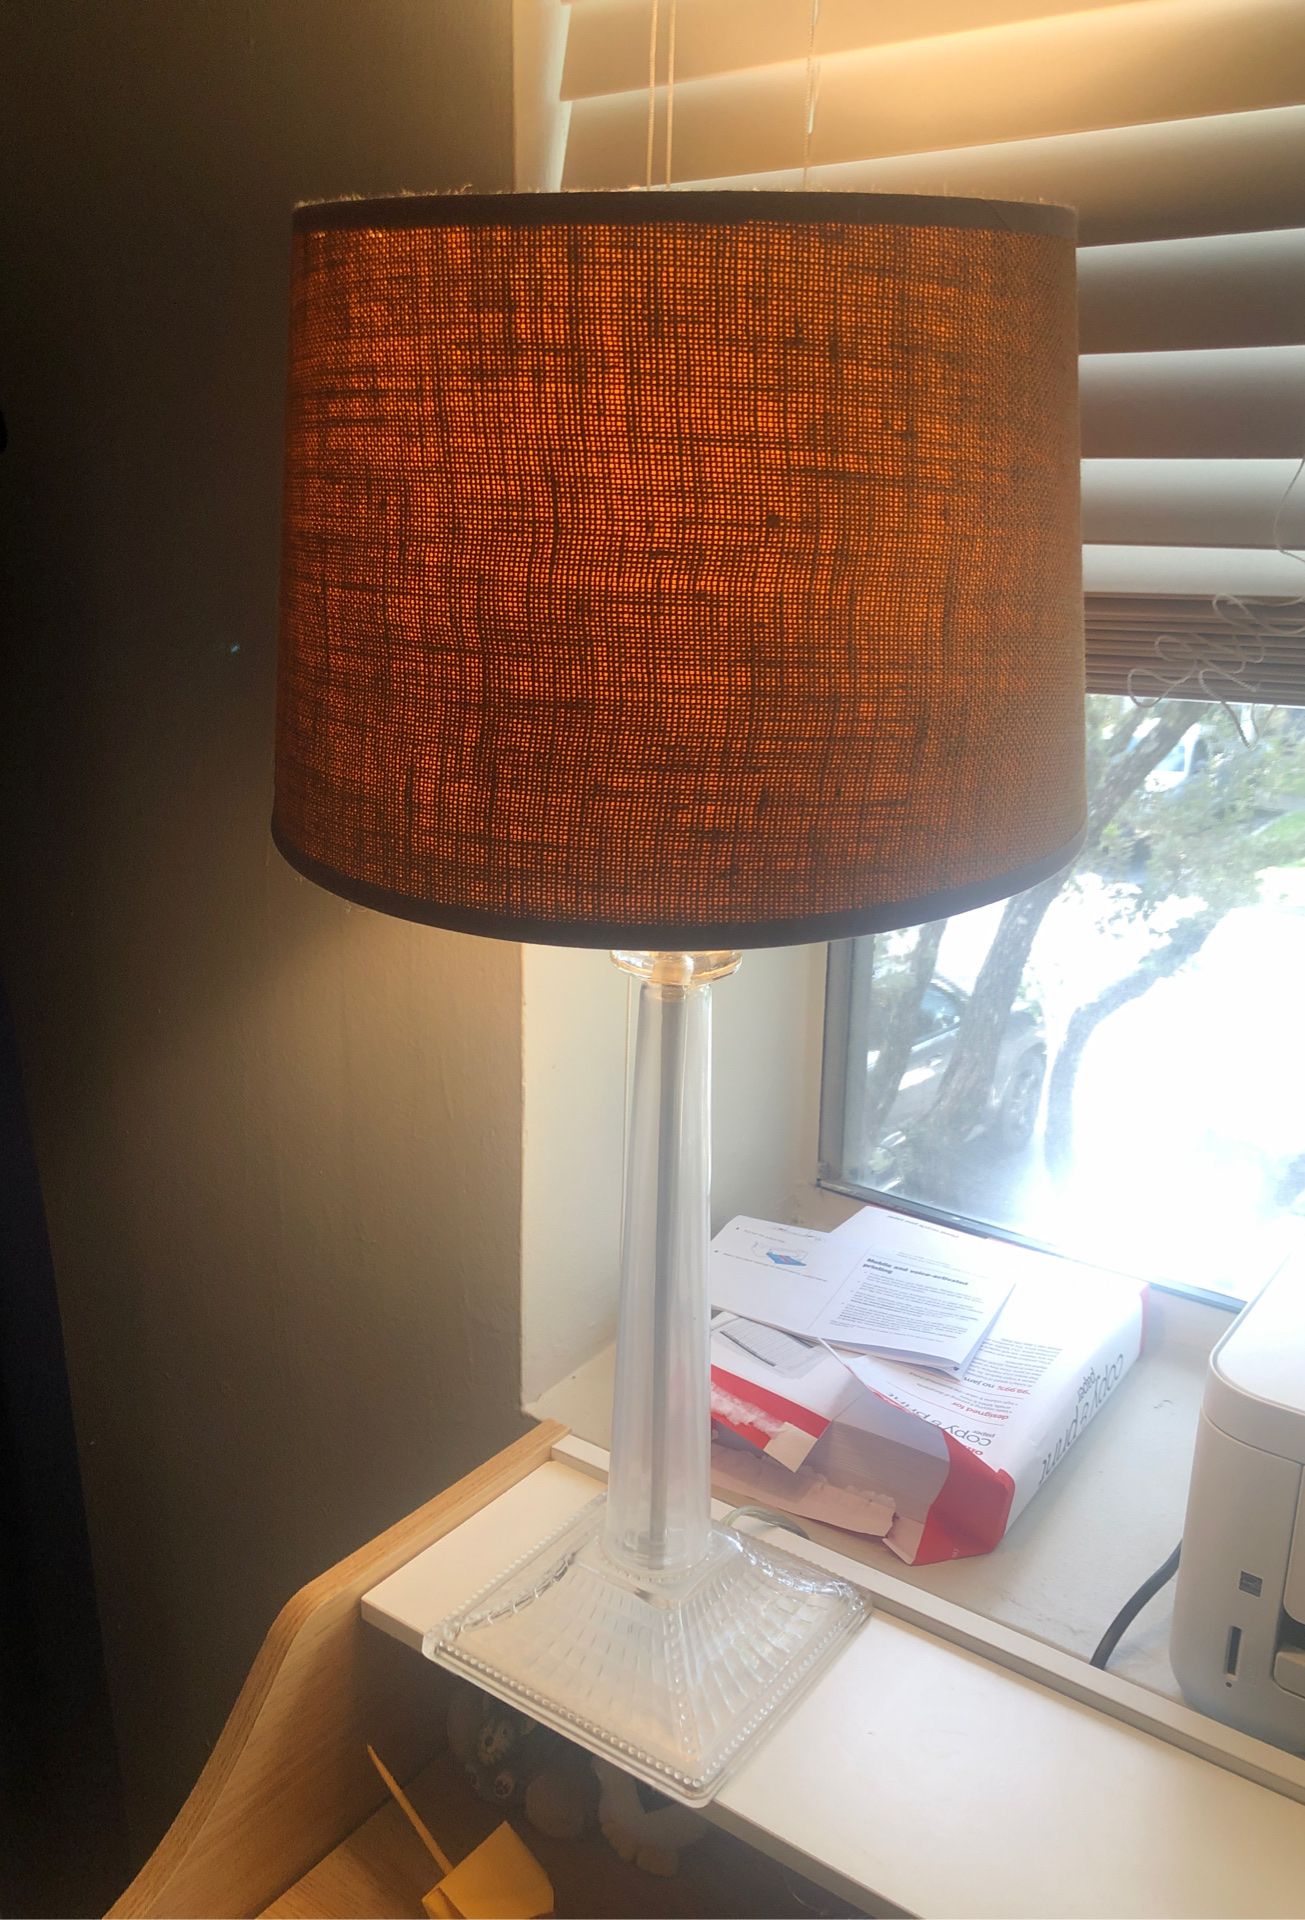 2 LAMPS FOR $10 - GONE ASAP